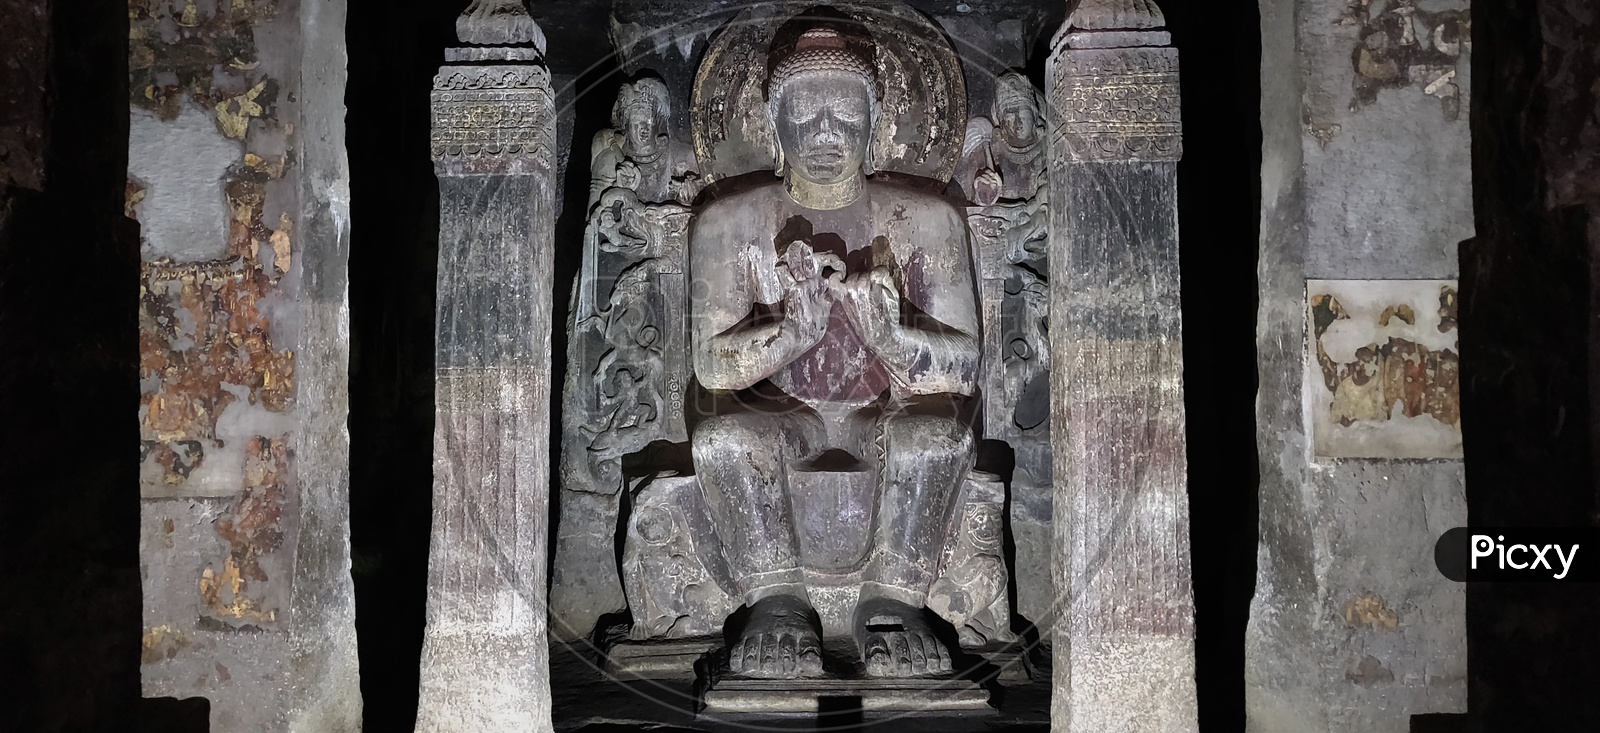 Ancient Stone Cravings of Buddha Temples at  Ajanta Caves    Or  Tourist Attraction Of  Ancient Caves At Ajanta in Deccan Plateau